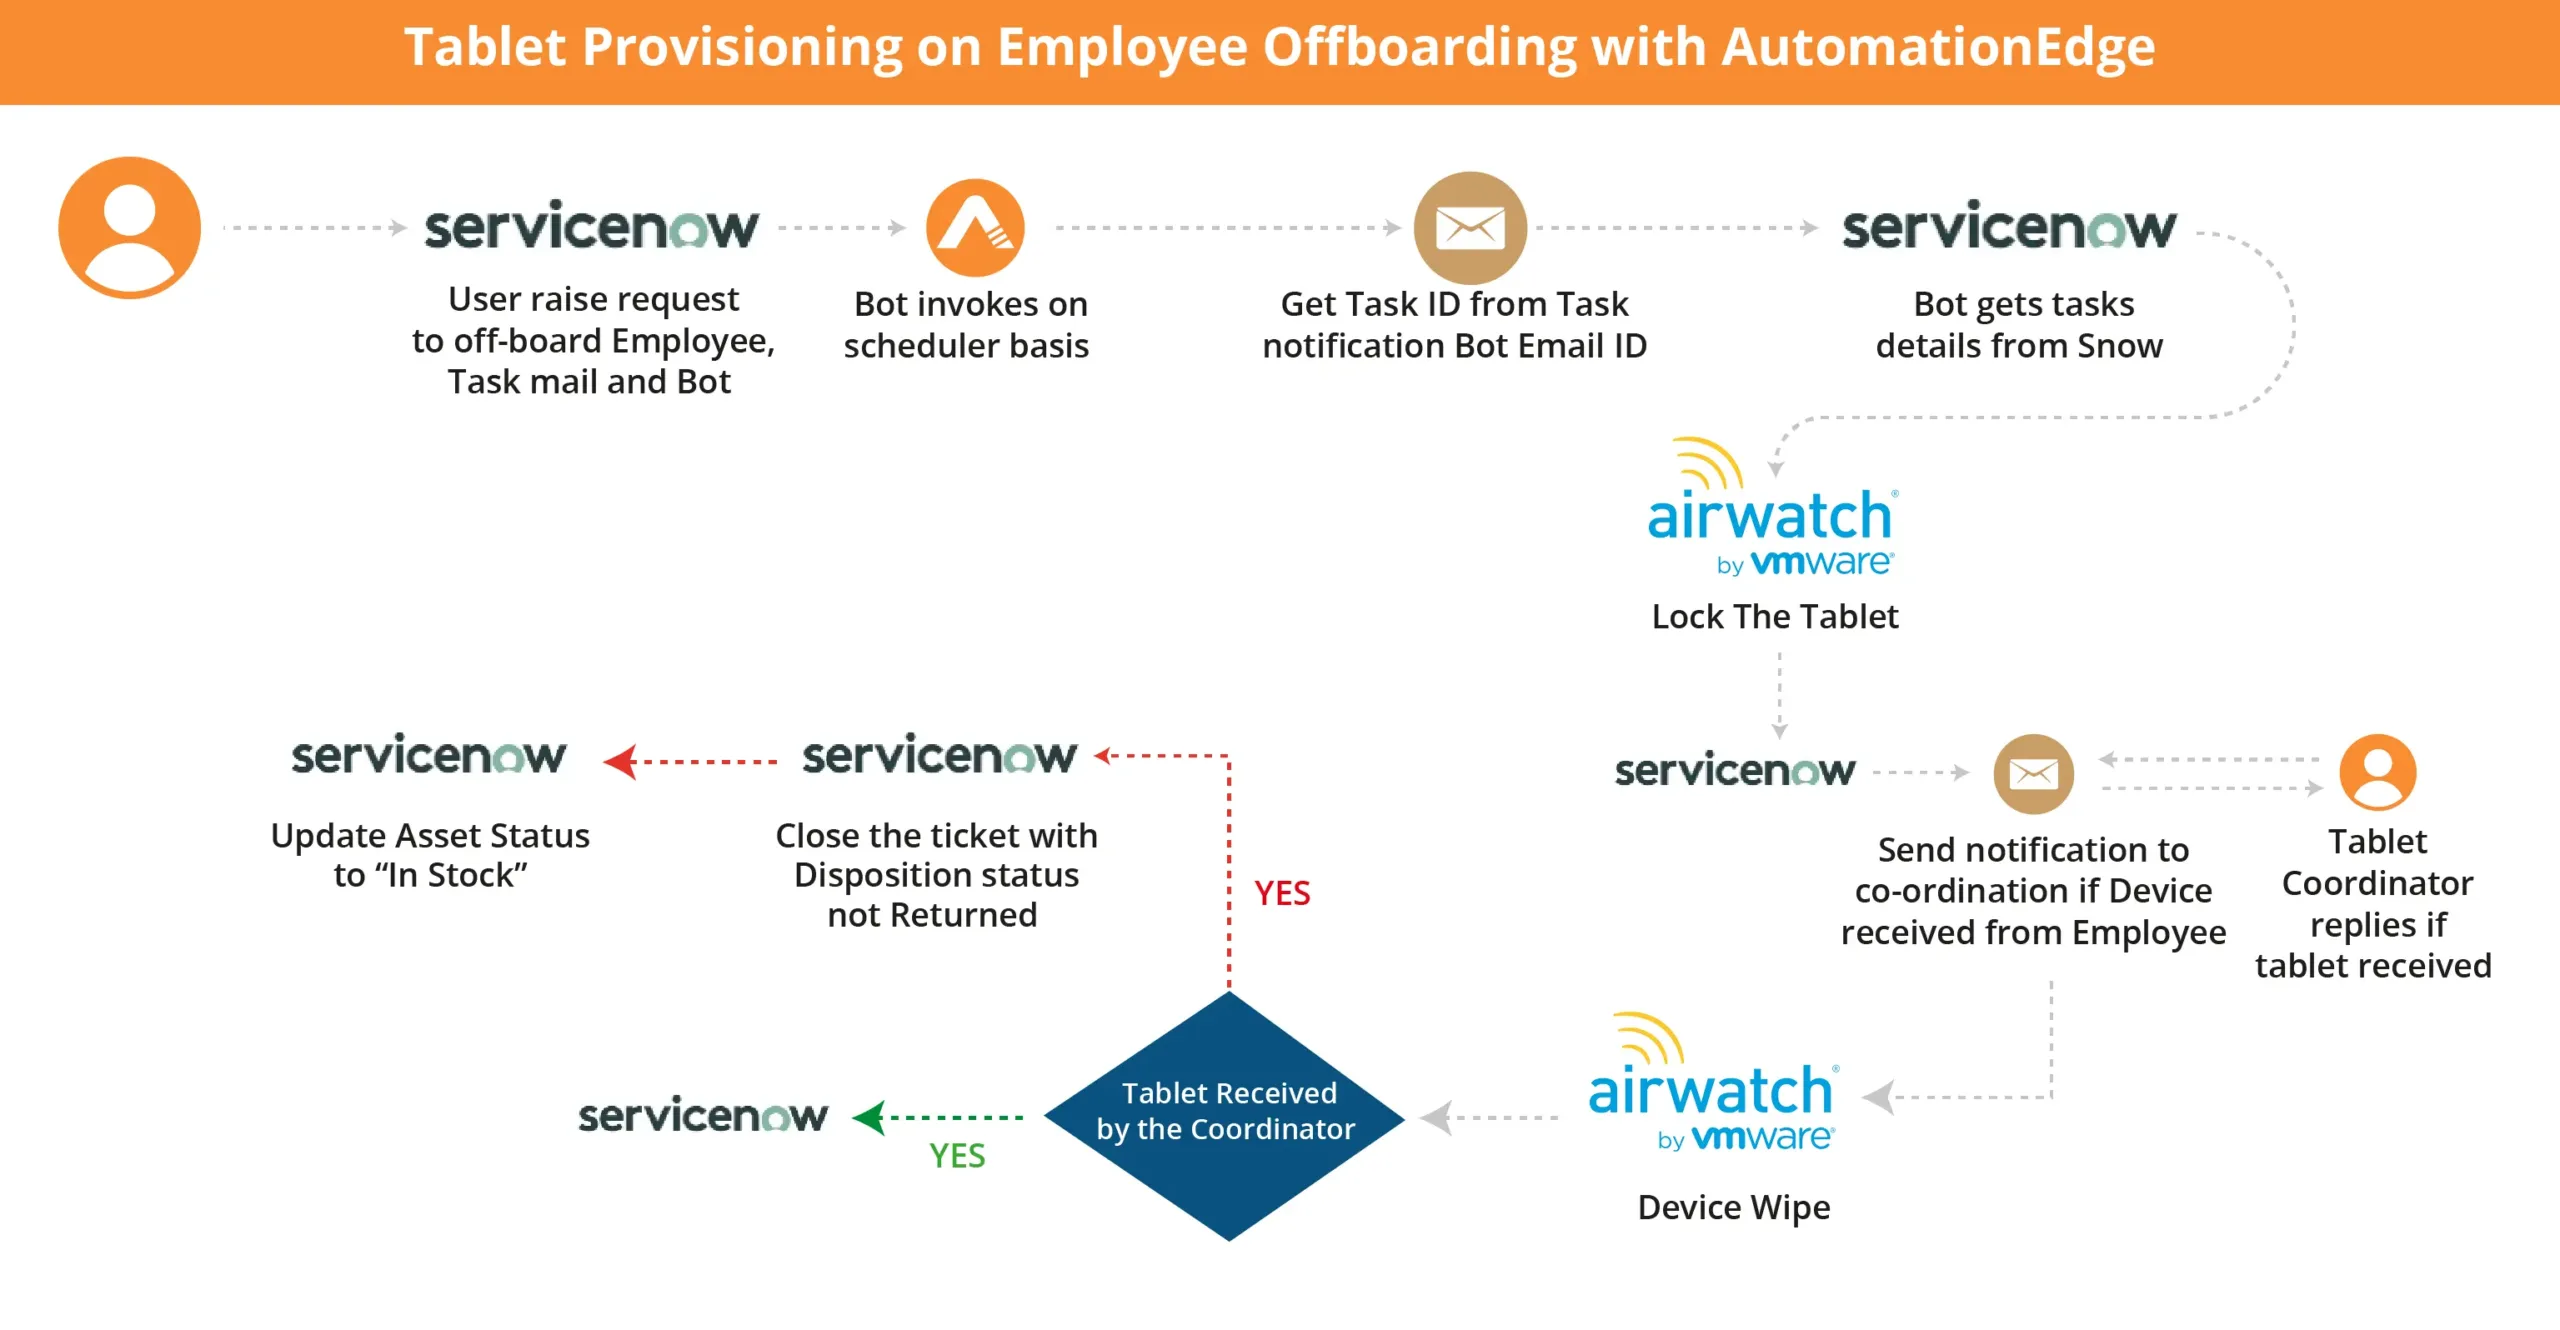 Tablet Provisioning on Employee Offboarding with AutomationEdge